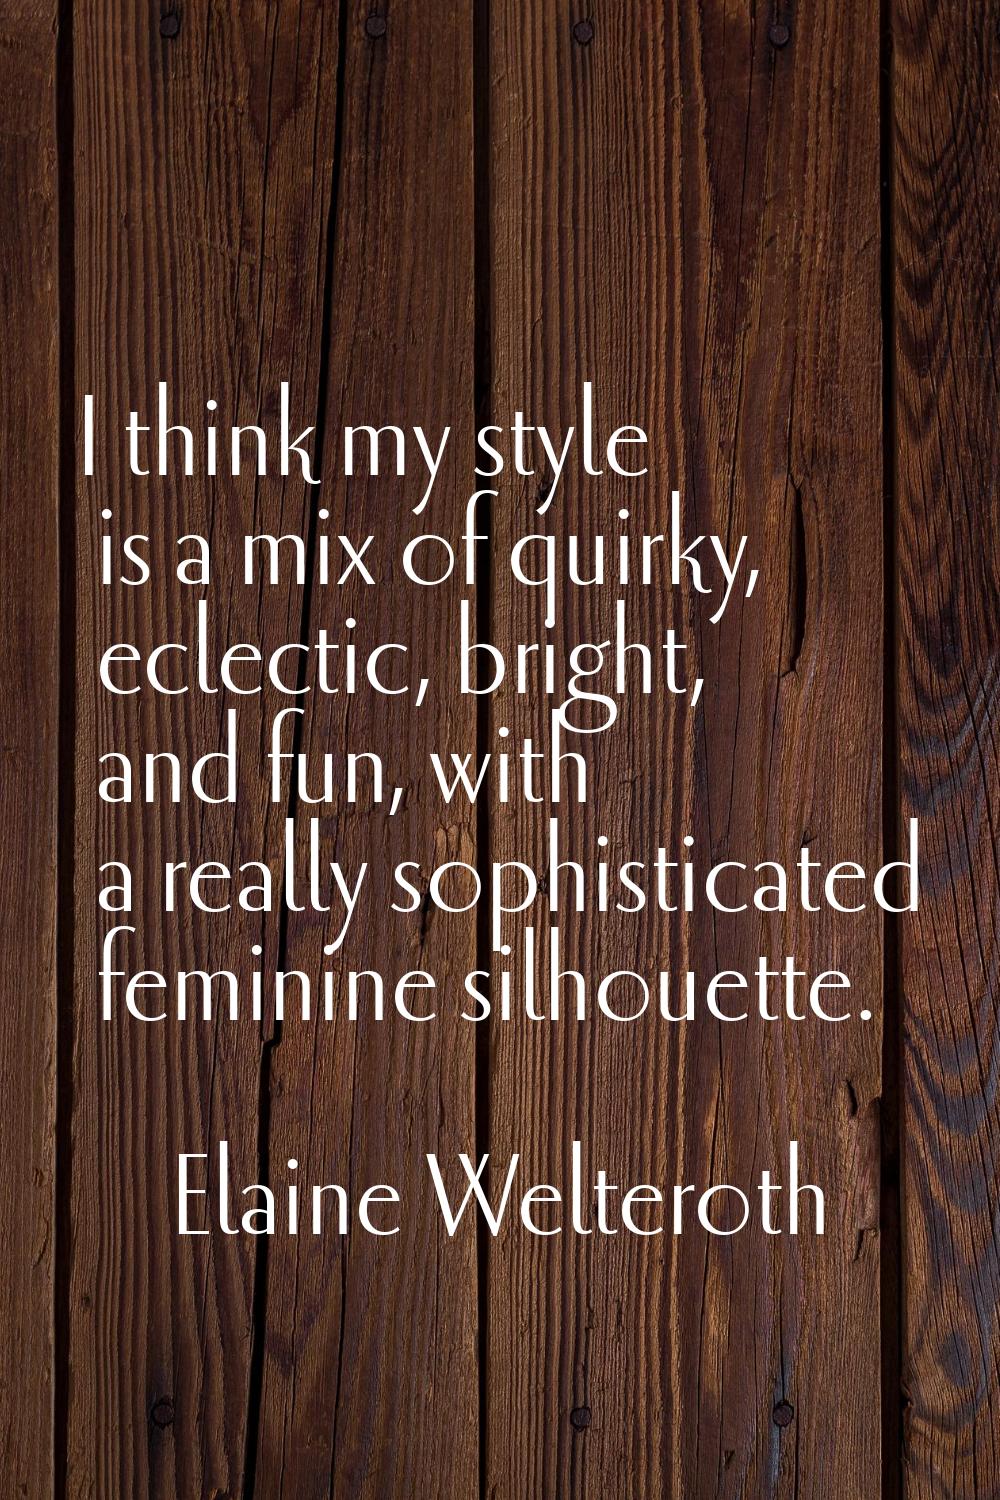 I think my style is a mix of quirky, eclectic, bright, and fun, with a really sophisticated feminin